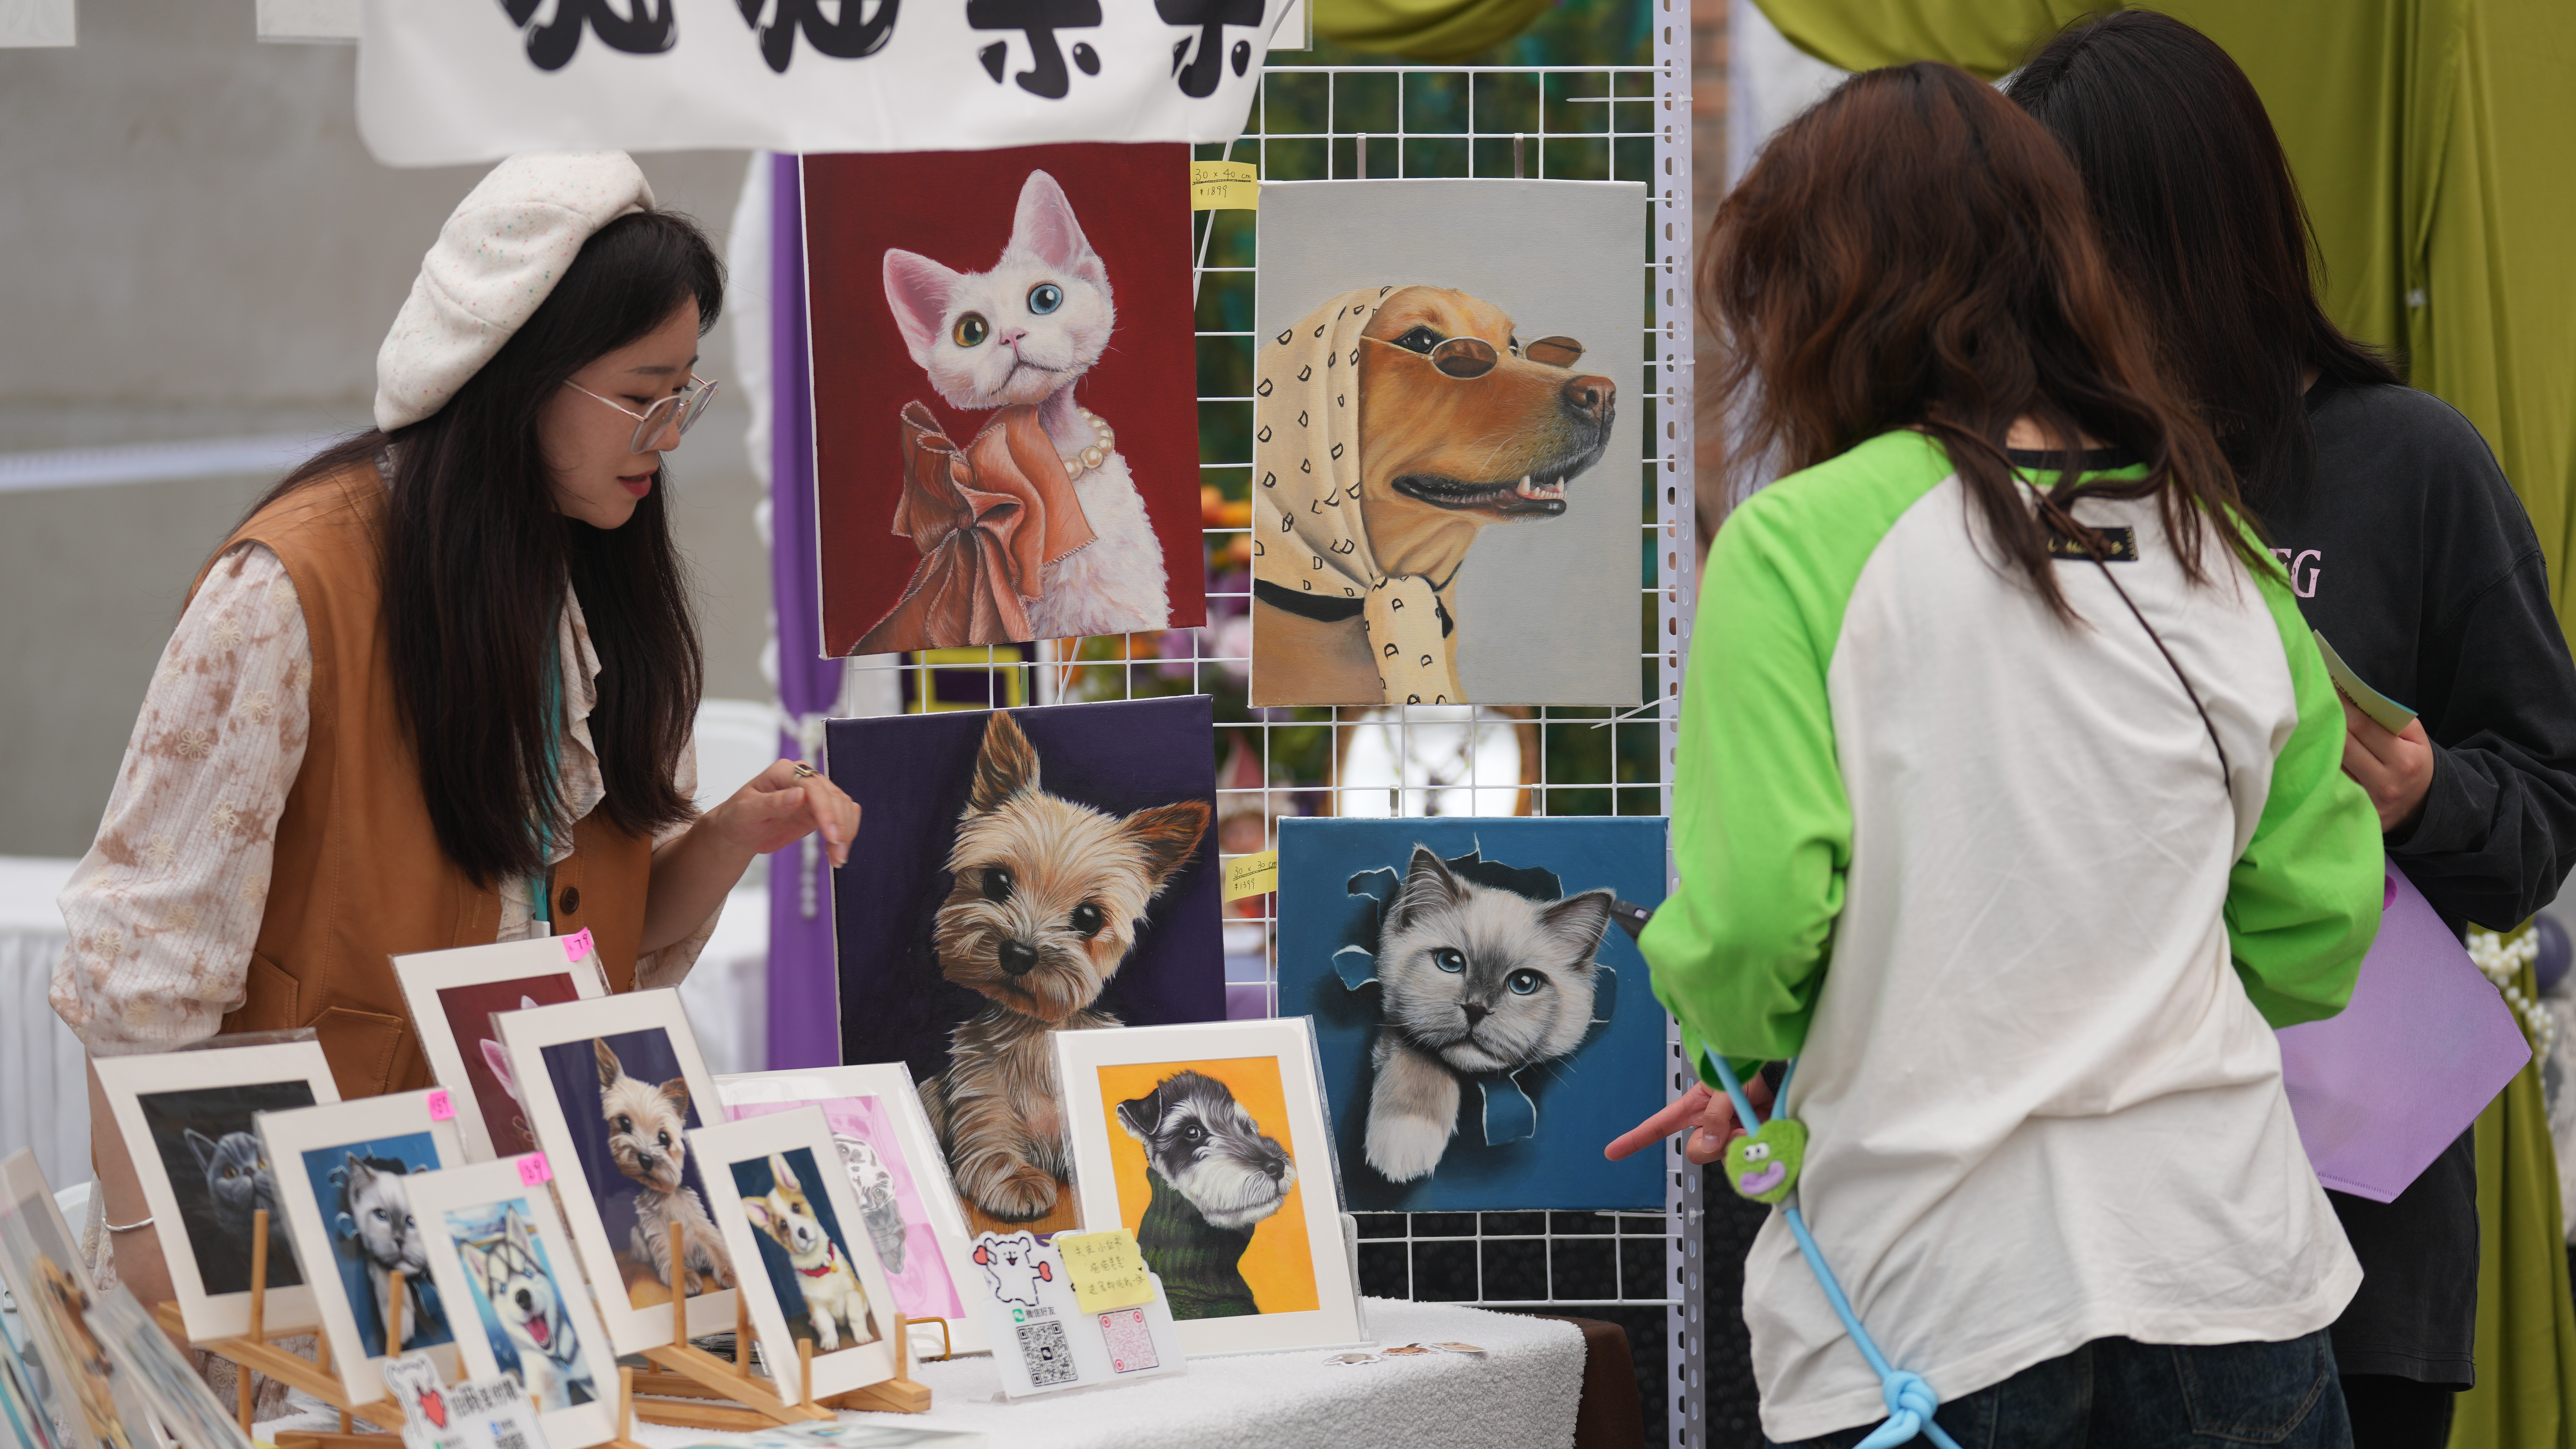 Pet photographs attract attention. /Chen Bo